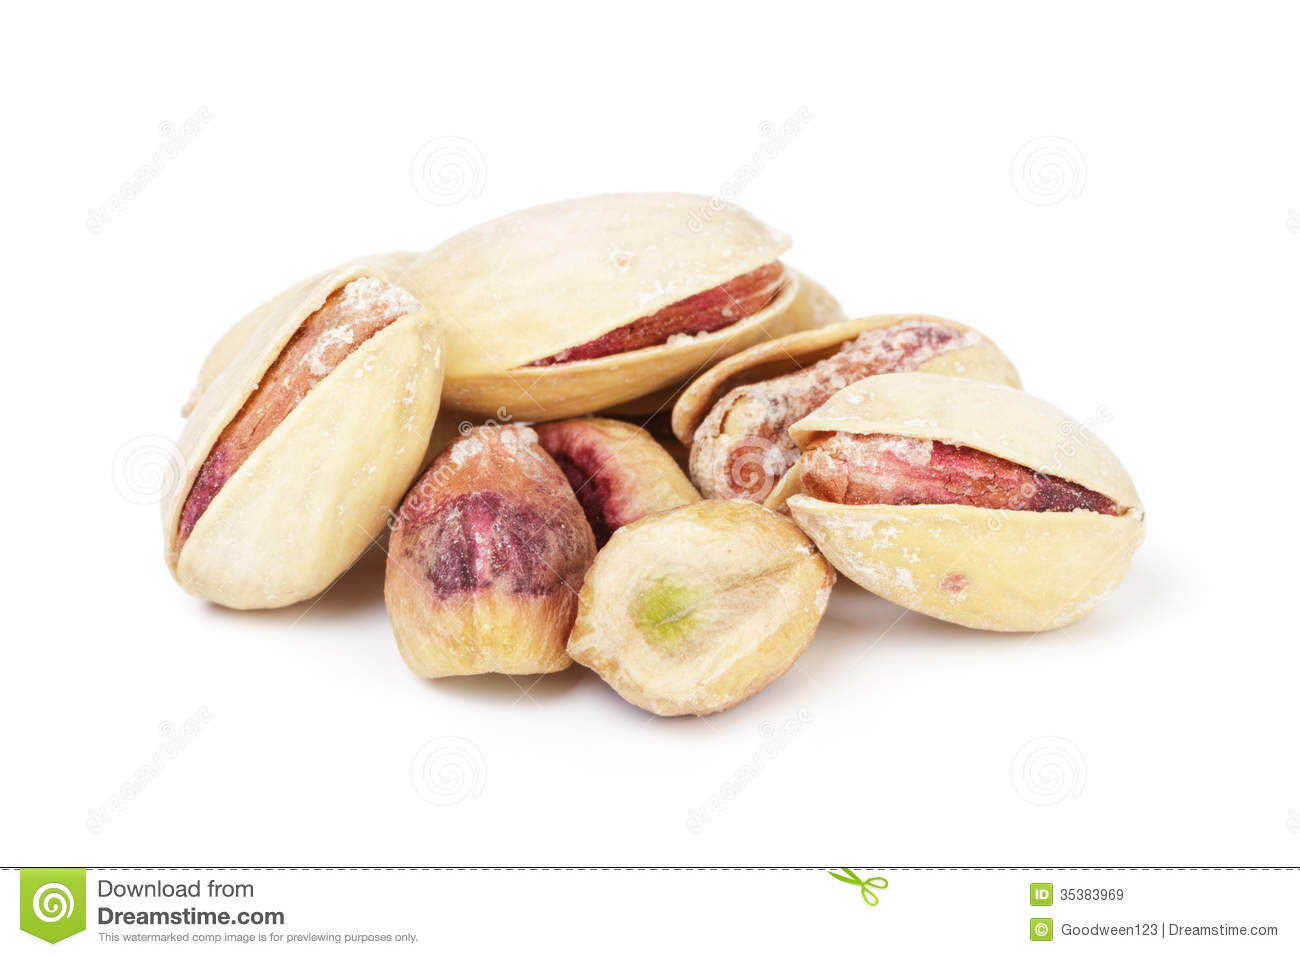 Roasted Salty Pistachios Nuts Royalty Free Stock Images   Image